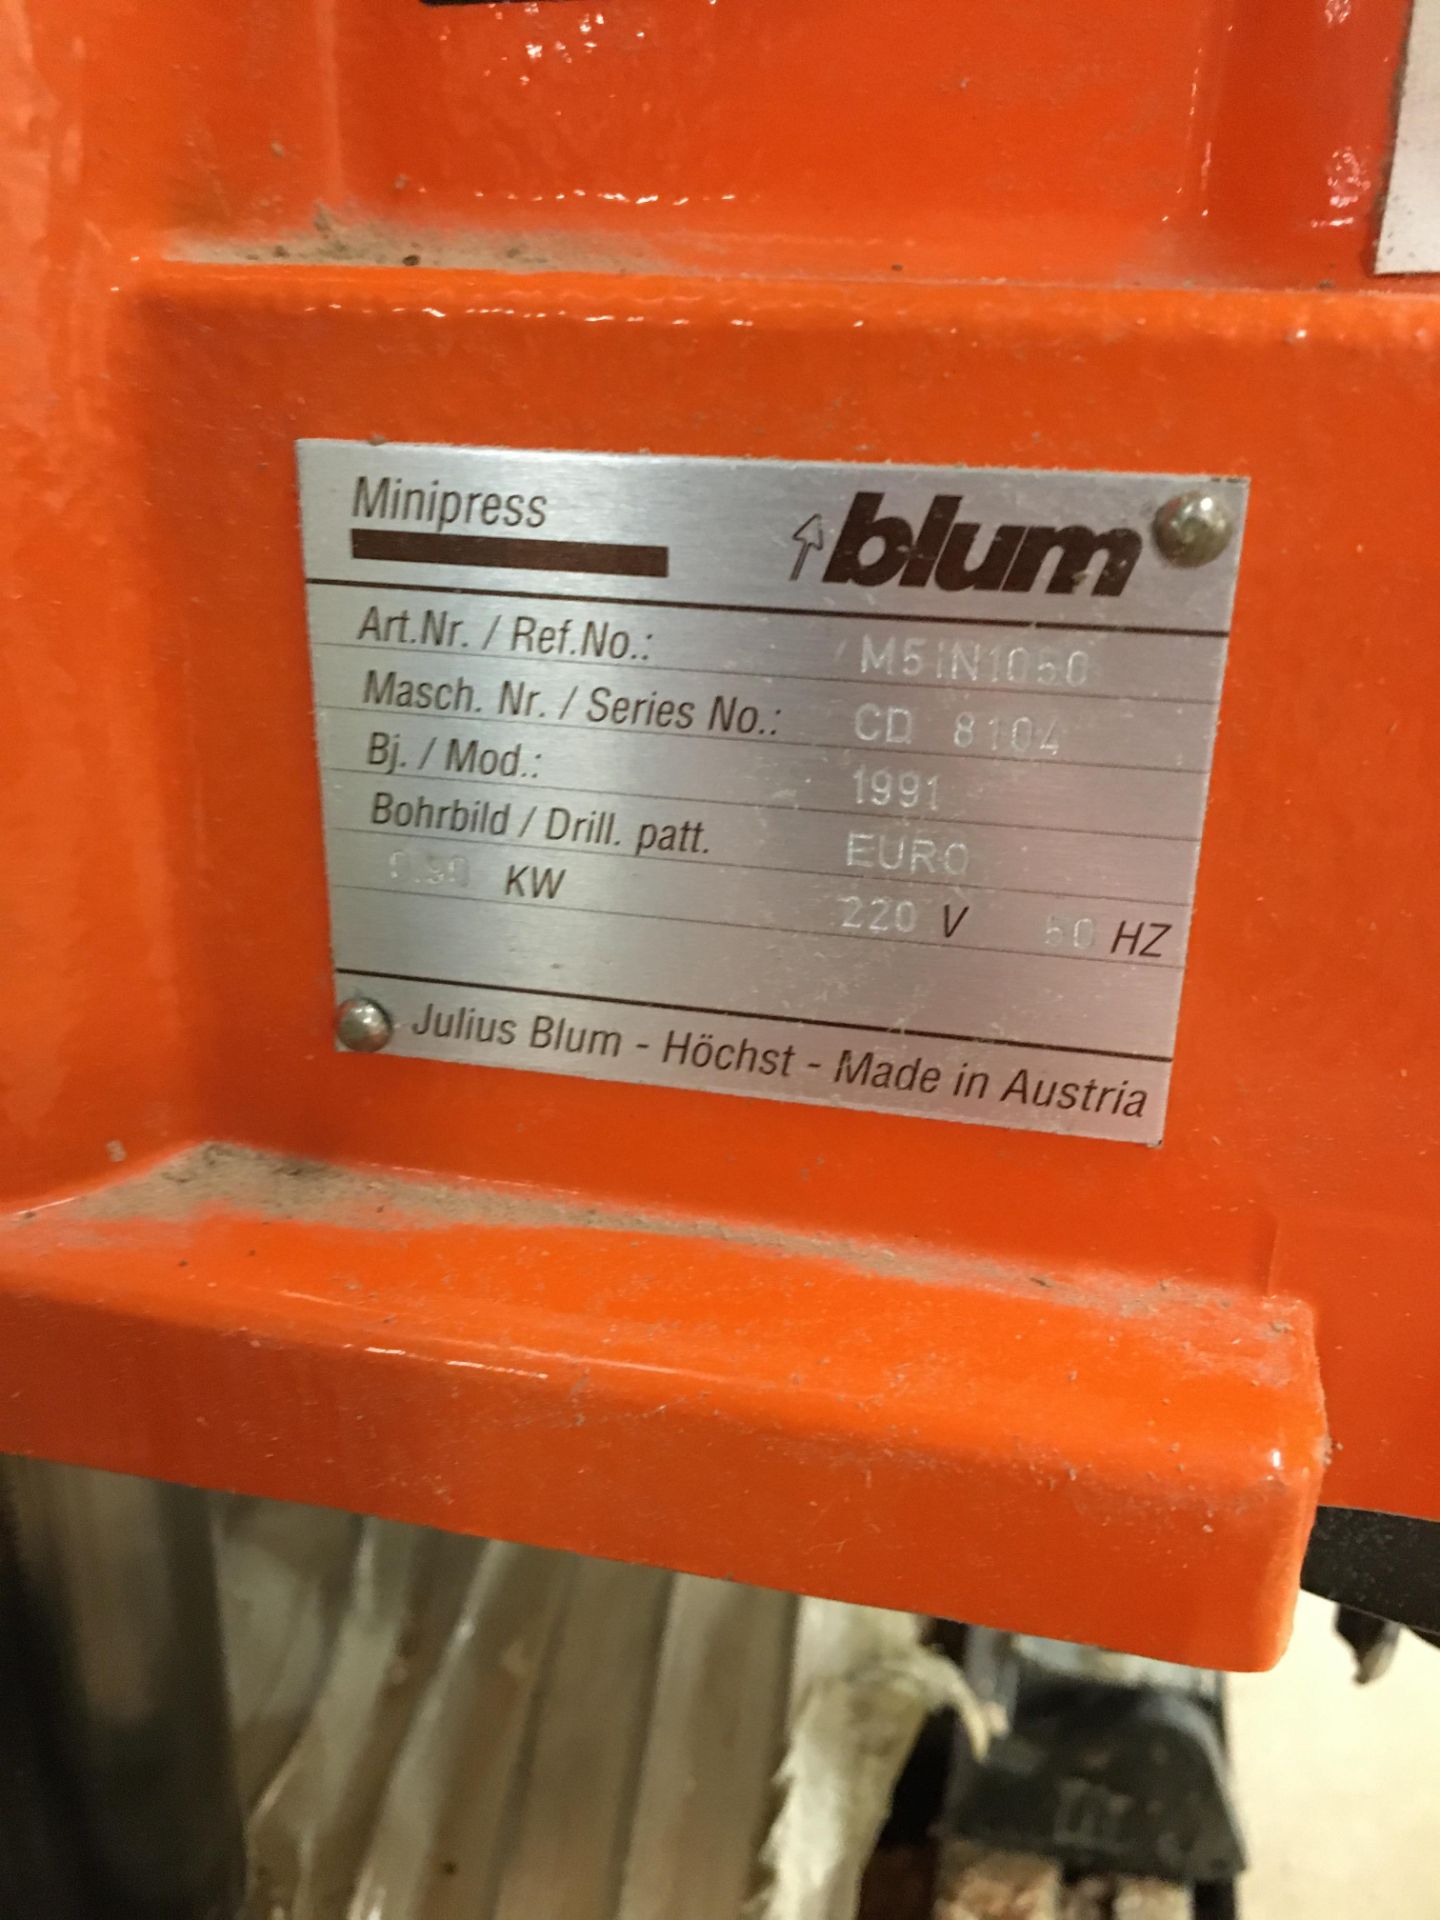 Blum, MiniPress M51N1050 drilling machine, Serial No. CD 8104 (1991) with fabricated steel framed - Image 4 of 5